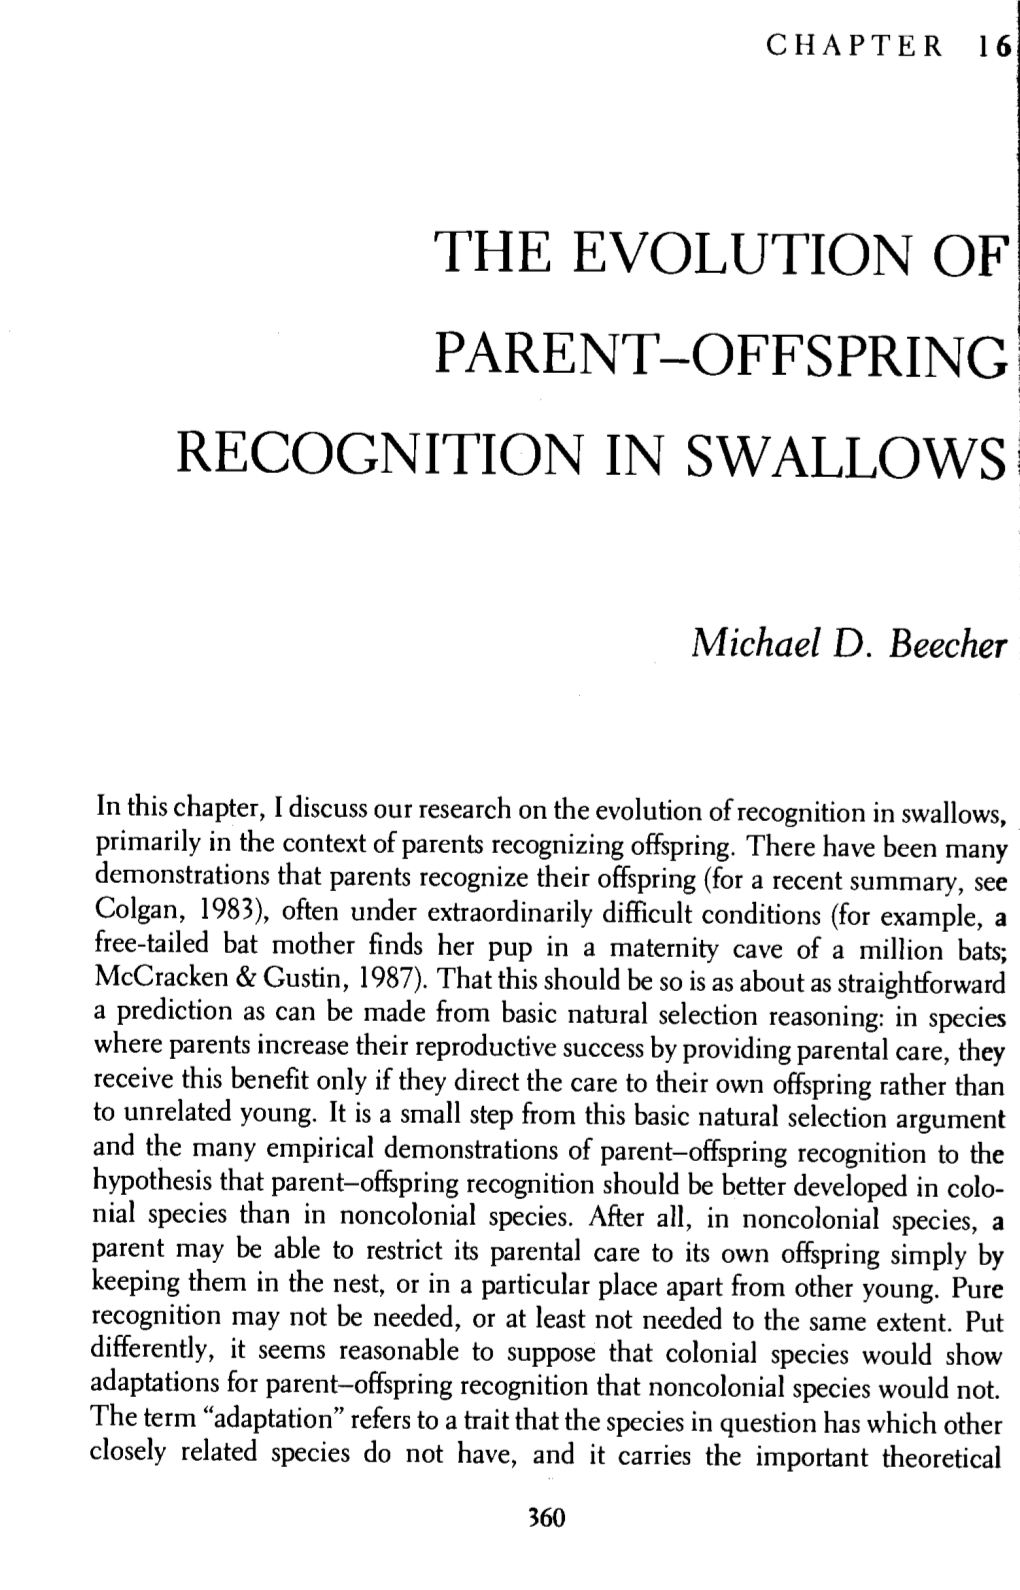 Evolution of Parent-Offspring Recognition in Swallows